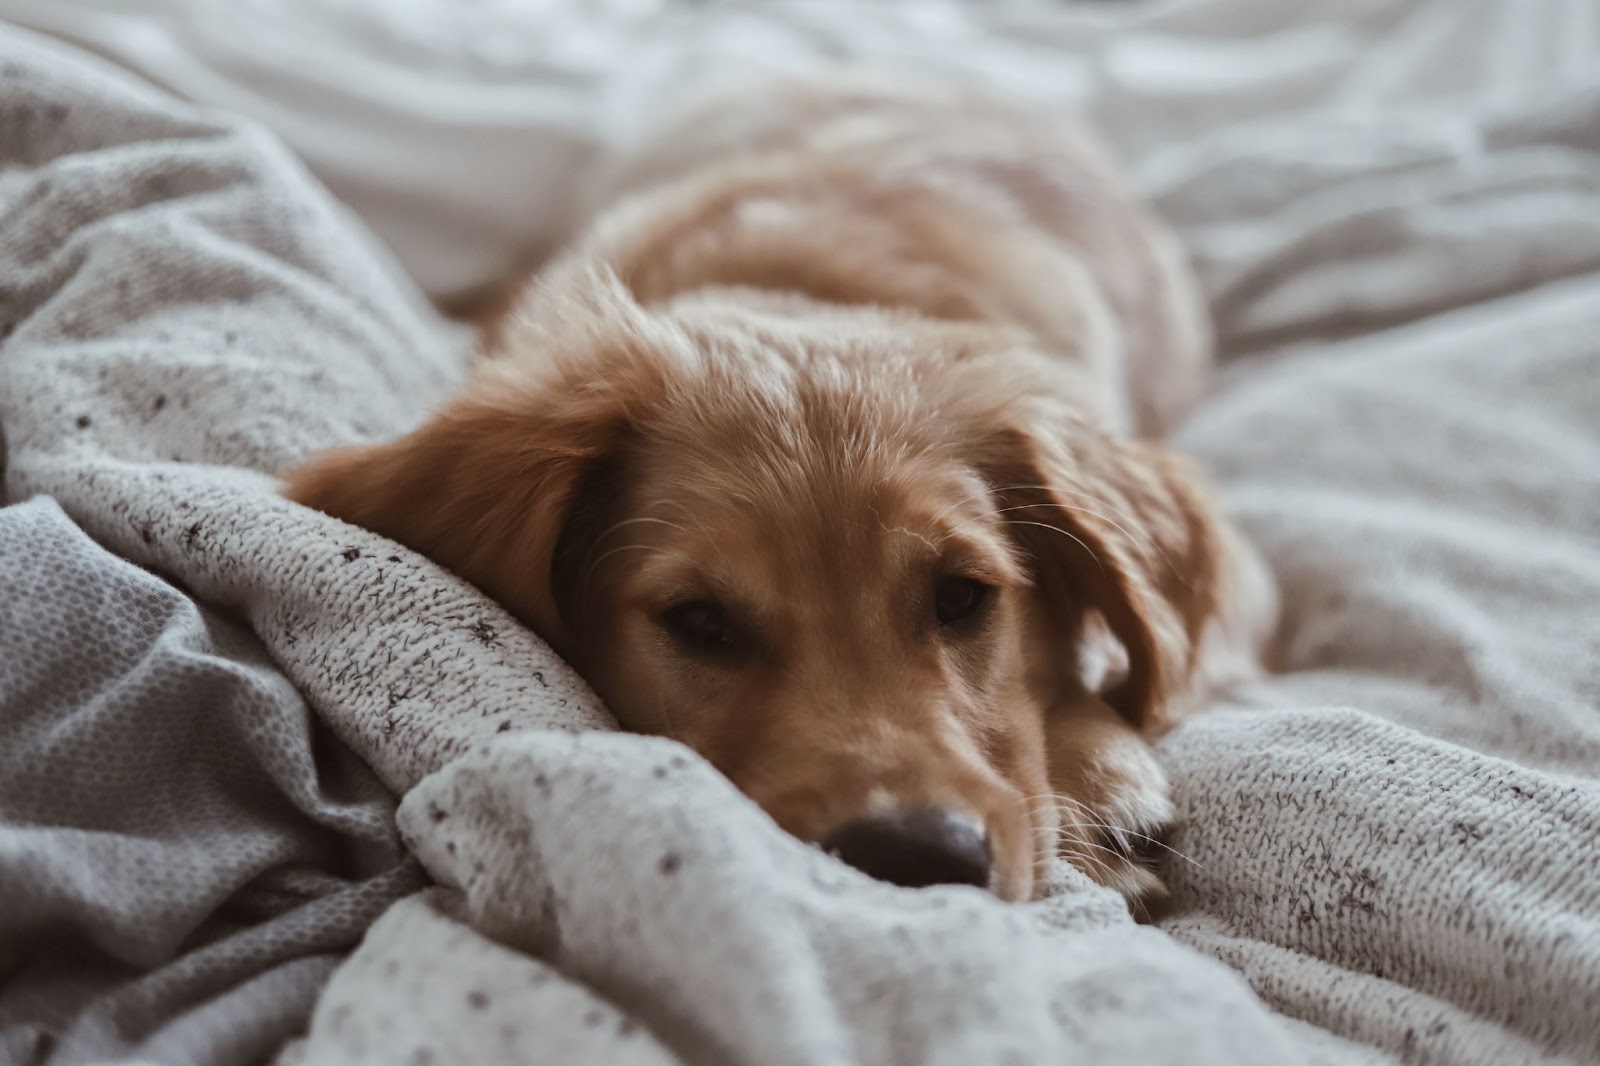 Puppy lying on a bed.